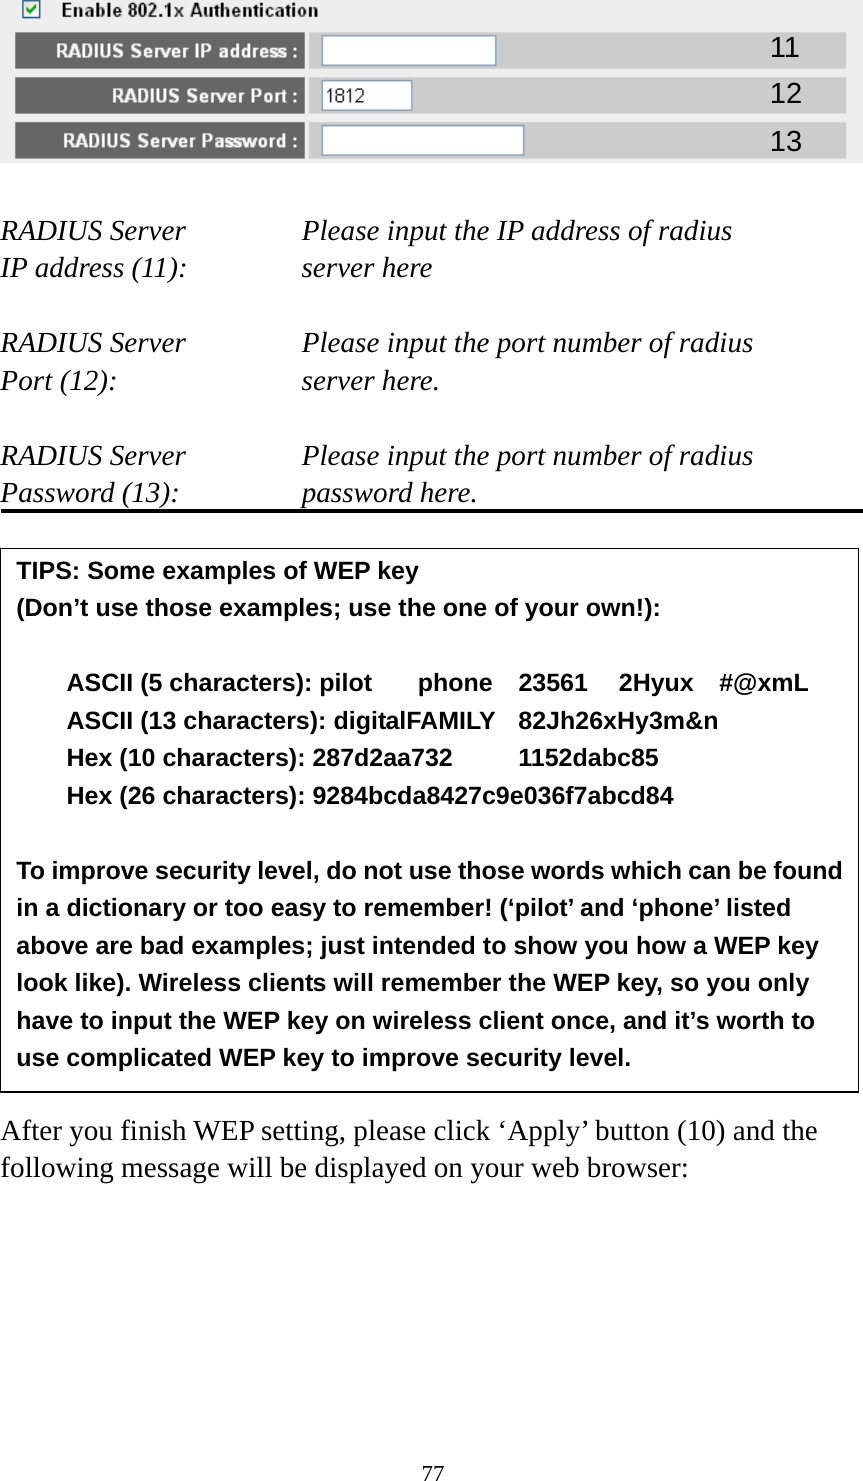 77   RADIUS Server      Please input the IP address of radius   IP address (11):      server here  RADIUS Server      Please input the port number of radius Port (12):    server here.  RADIUS Server      Please input the port number of radius Password (13):      password here.                 After you finish WEP setting, please click ‘Apply’ button (10) and the following message will be displayed on your web browser:  11 12 13 TIPS: Some examples of WEP key   (Don’t use those examples; use the one of your own!):  ASCII (5 characters): pilot    phone    23561    2Hyux    #@xmL ASCII (13 characters): digitalFAMILY  82Jh26xHy3m&amp;n Hex (10 characters): 287d2aa732   1152dabc85 Hex (26 characters): 9284bcda8427c9e036f7abcd84  To improve security level, do not use those words which can be found in a dictionary or too easy to remember! (‘pilot’ and ‘phone’ listed above are bad examples; just intended to show you how a WEP key look like). Wireless clients will remember the WEP key, so you only have to input the WEP key on wireless client once, and it’s worth to use complicated WEP key to improve security level. 